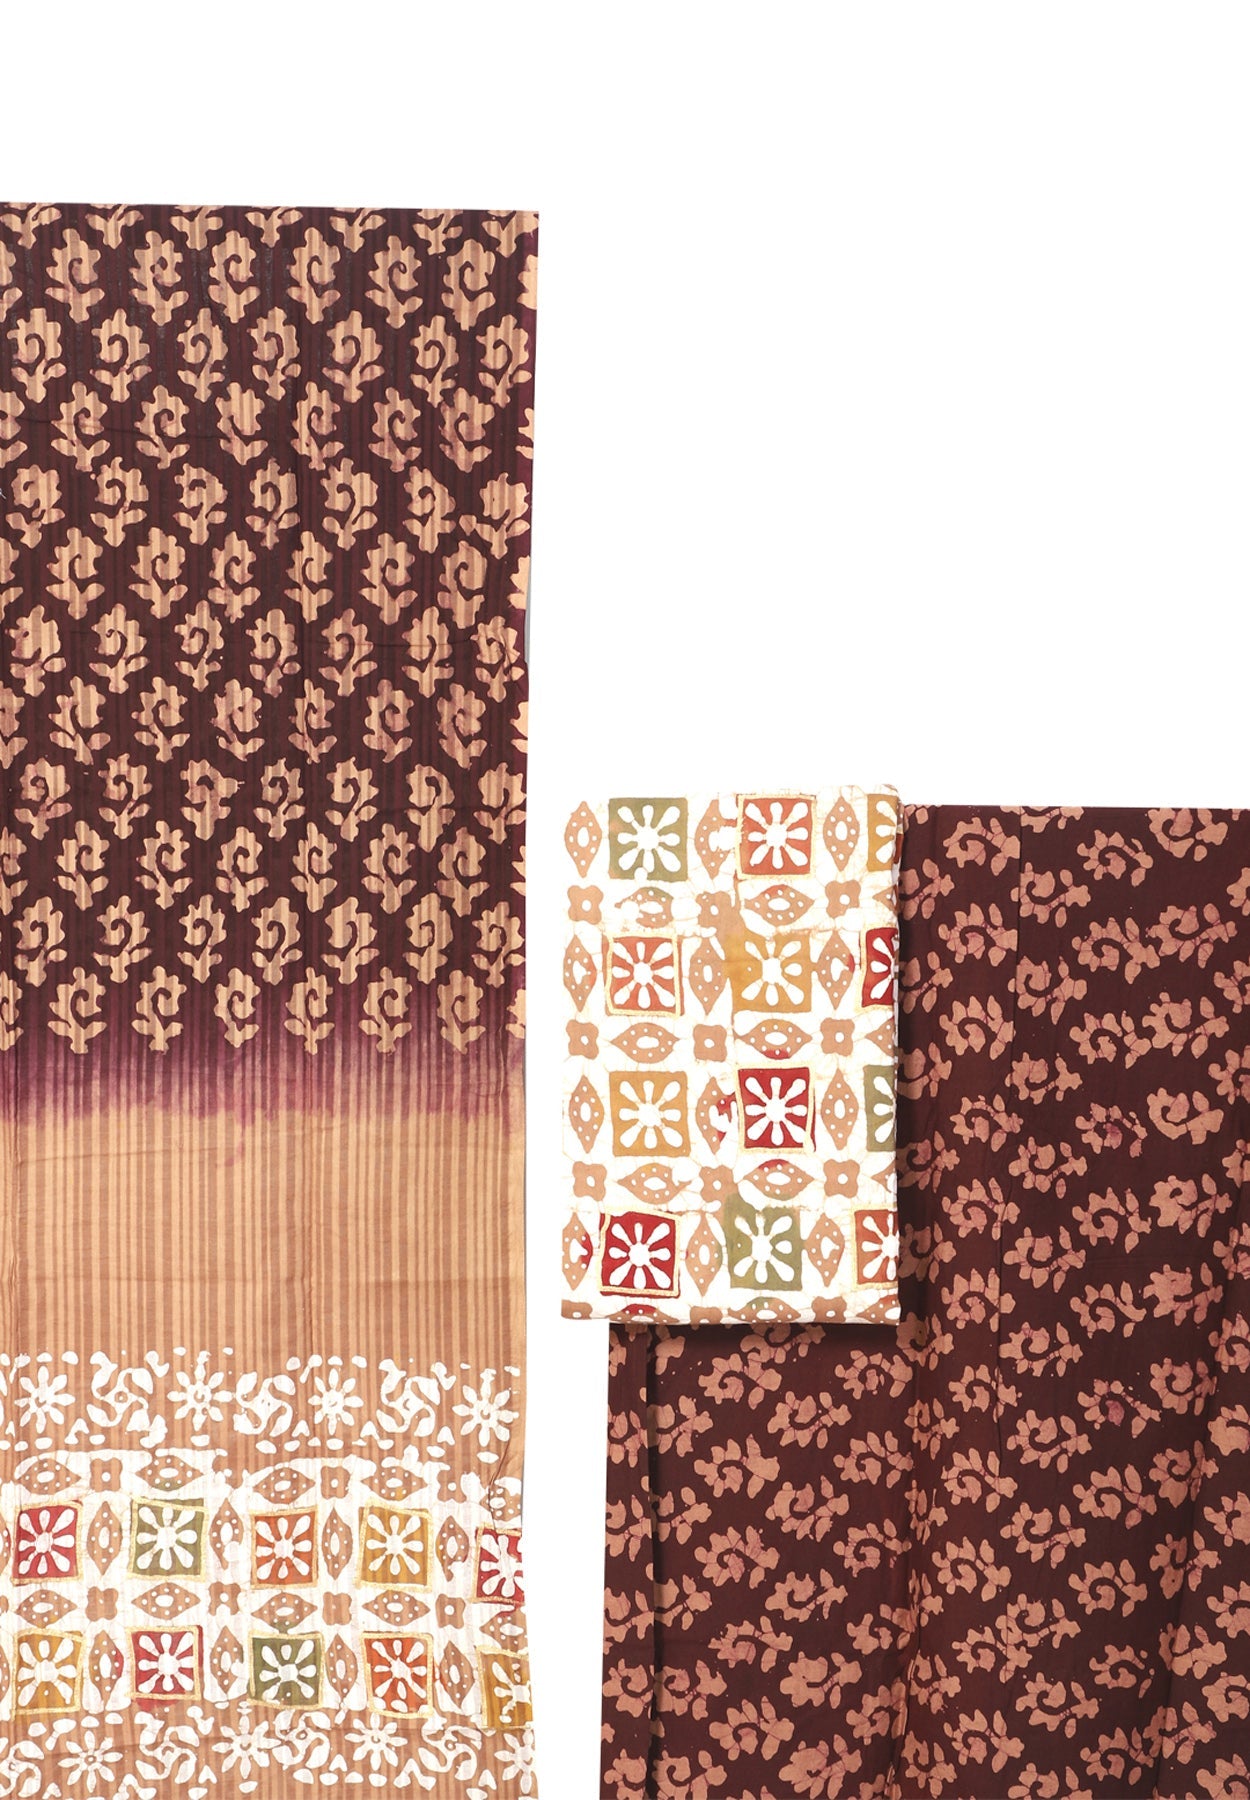 Brown & White Printed Unstitch Dress Material with Dupatta